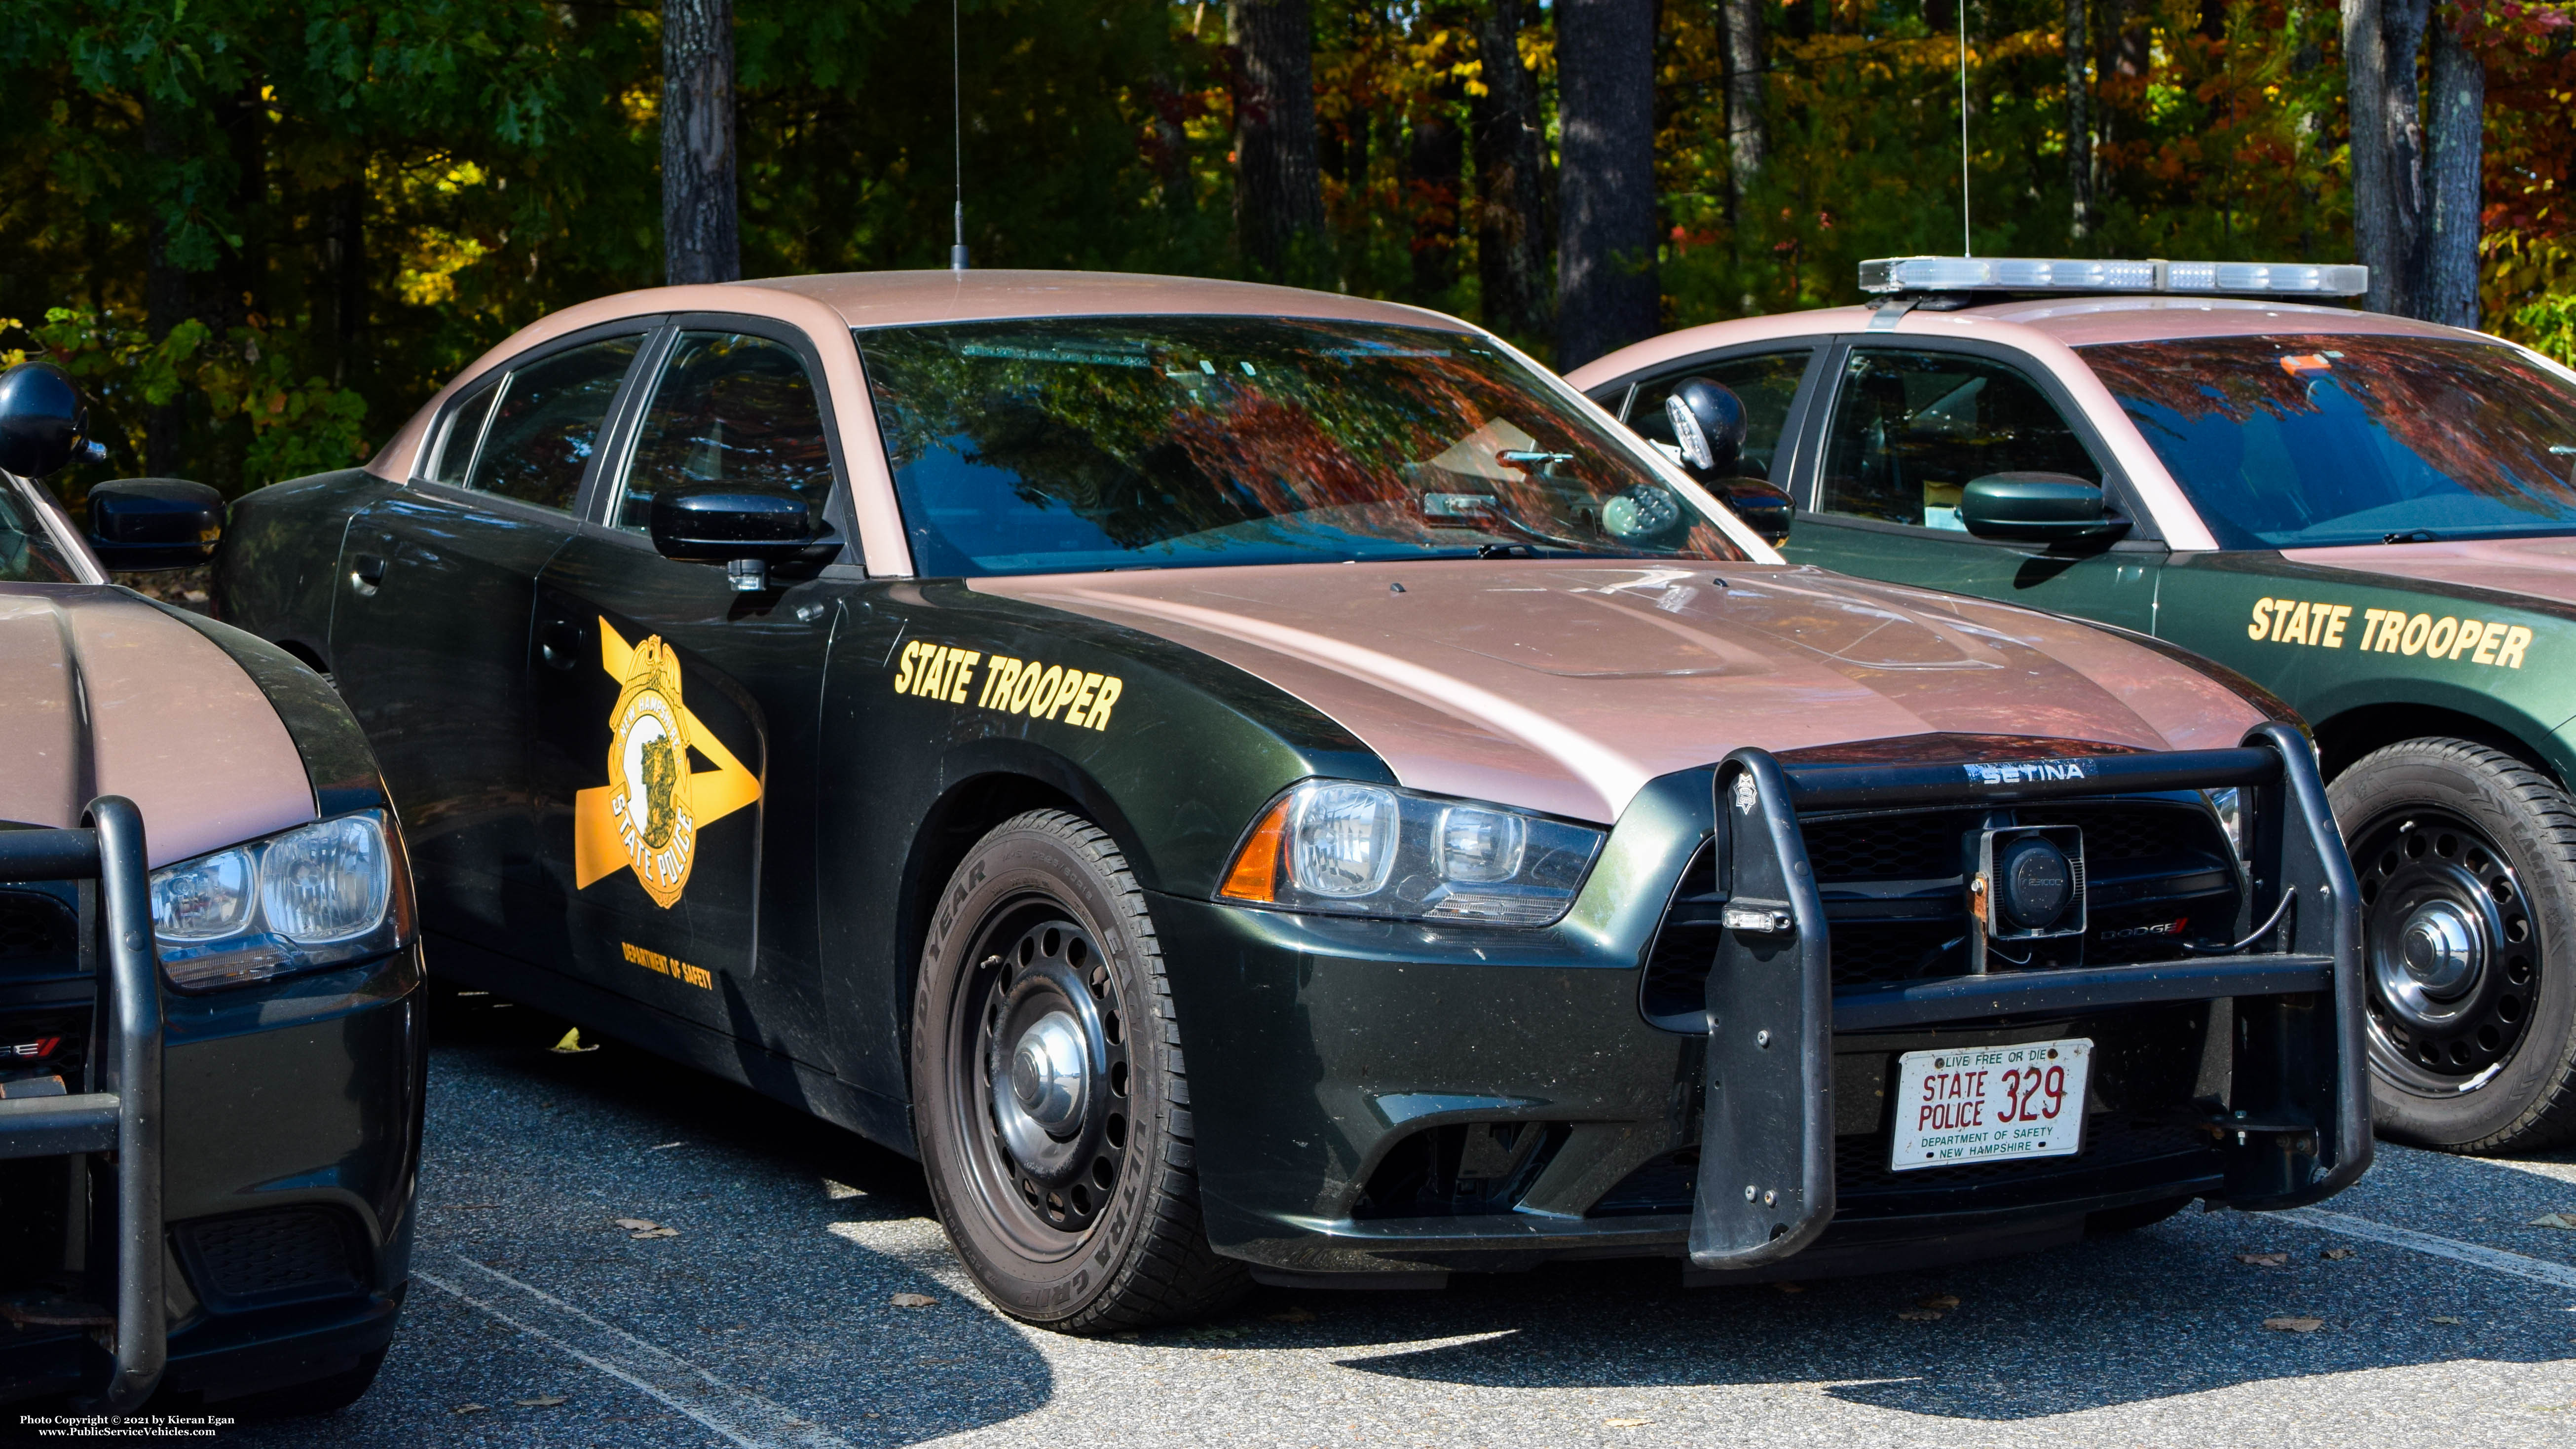 A photo  of New Hampshire State Police
            Cruiser 329, a 2014 Dodge Charger             taken by Kieran Egan